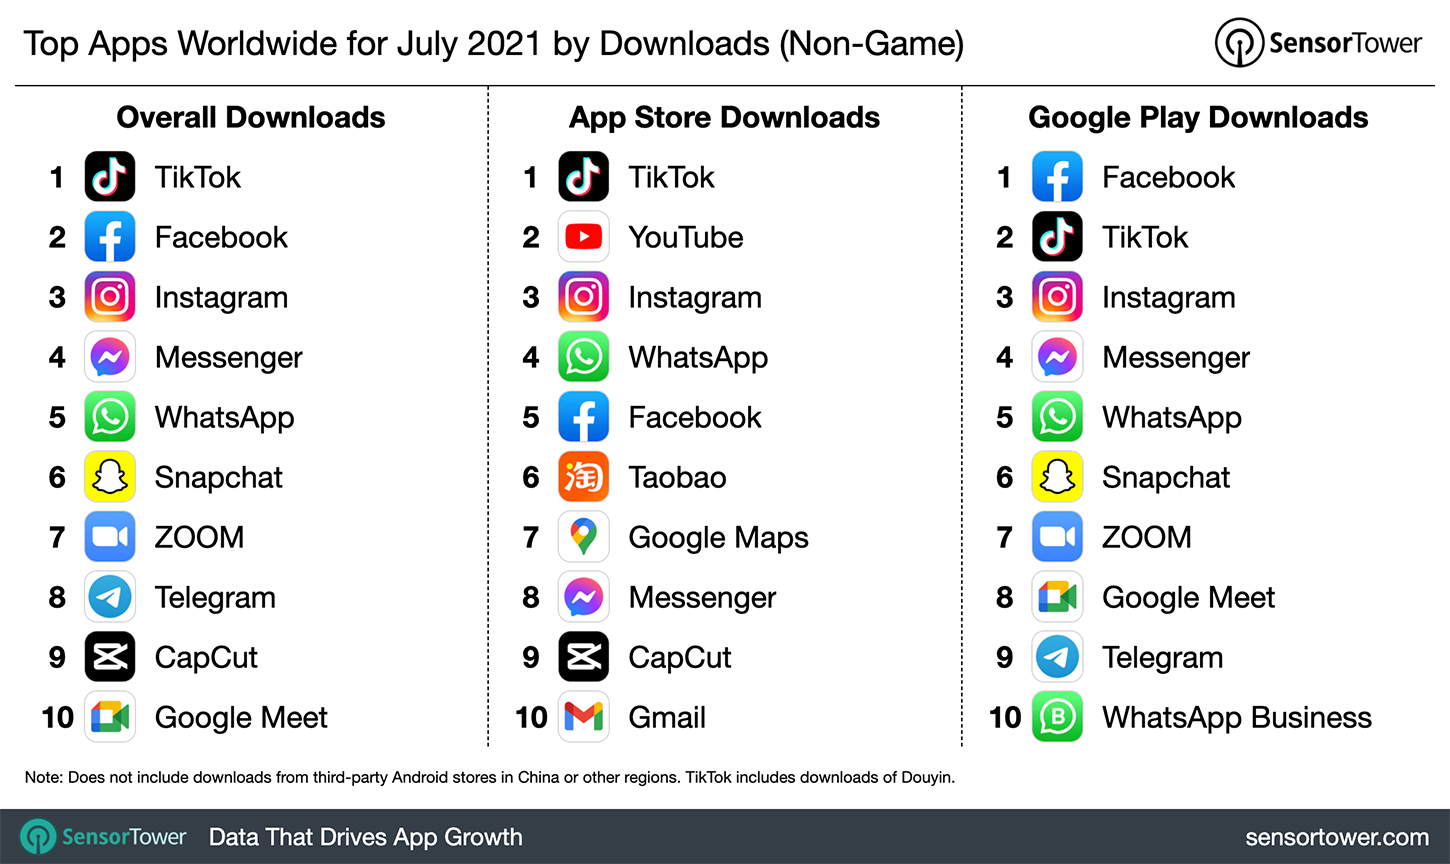 Top Apps Worldwide for July 2021 by Downloads